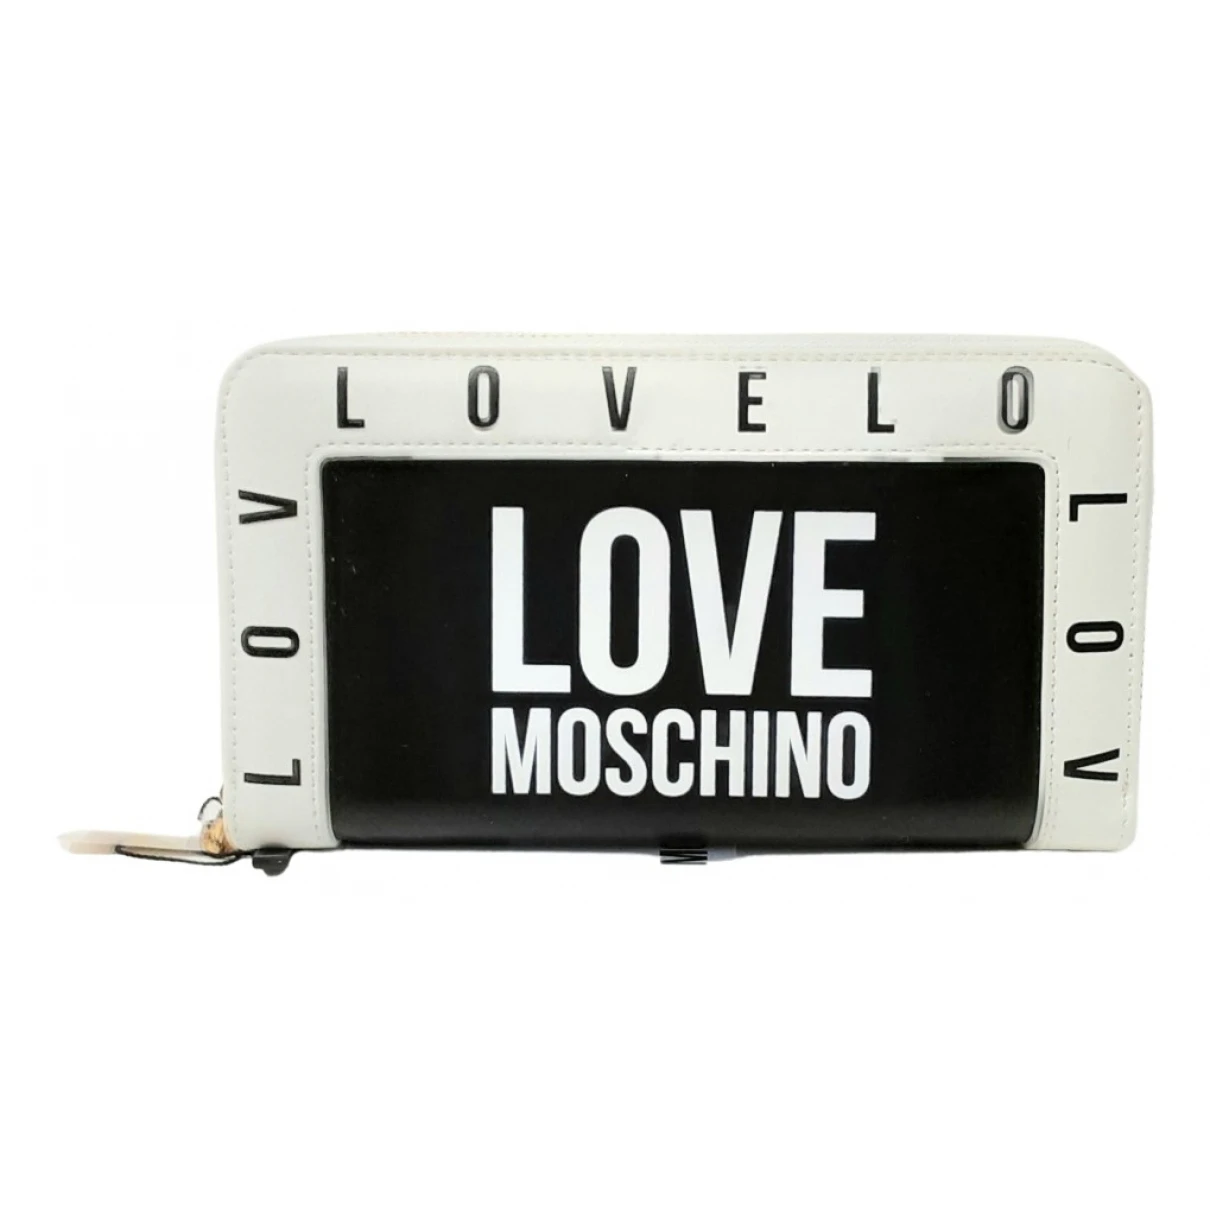 accessories Moschino Love wallets for Female Other. Used condition